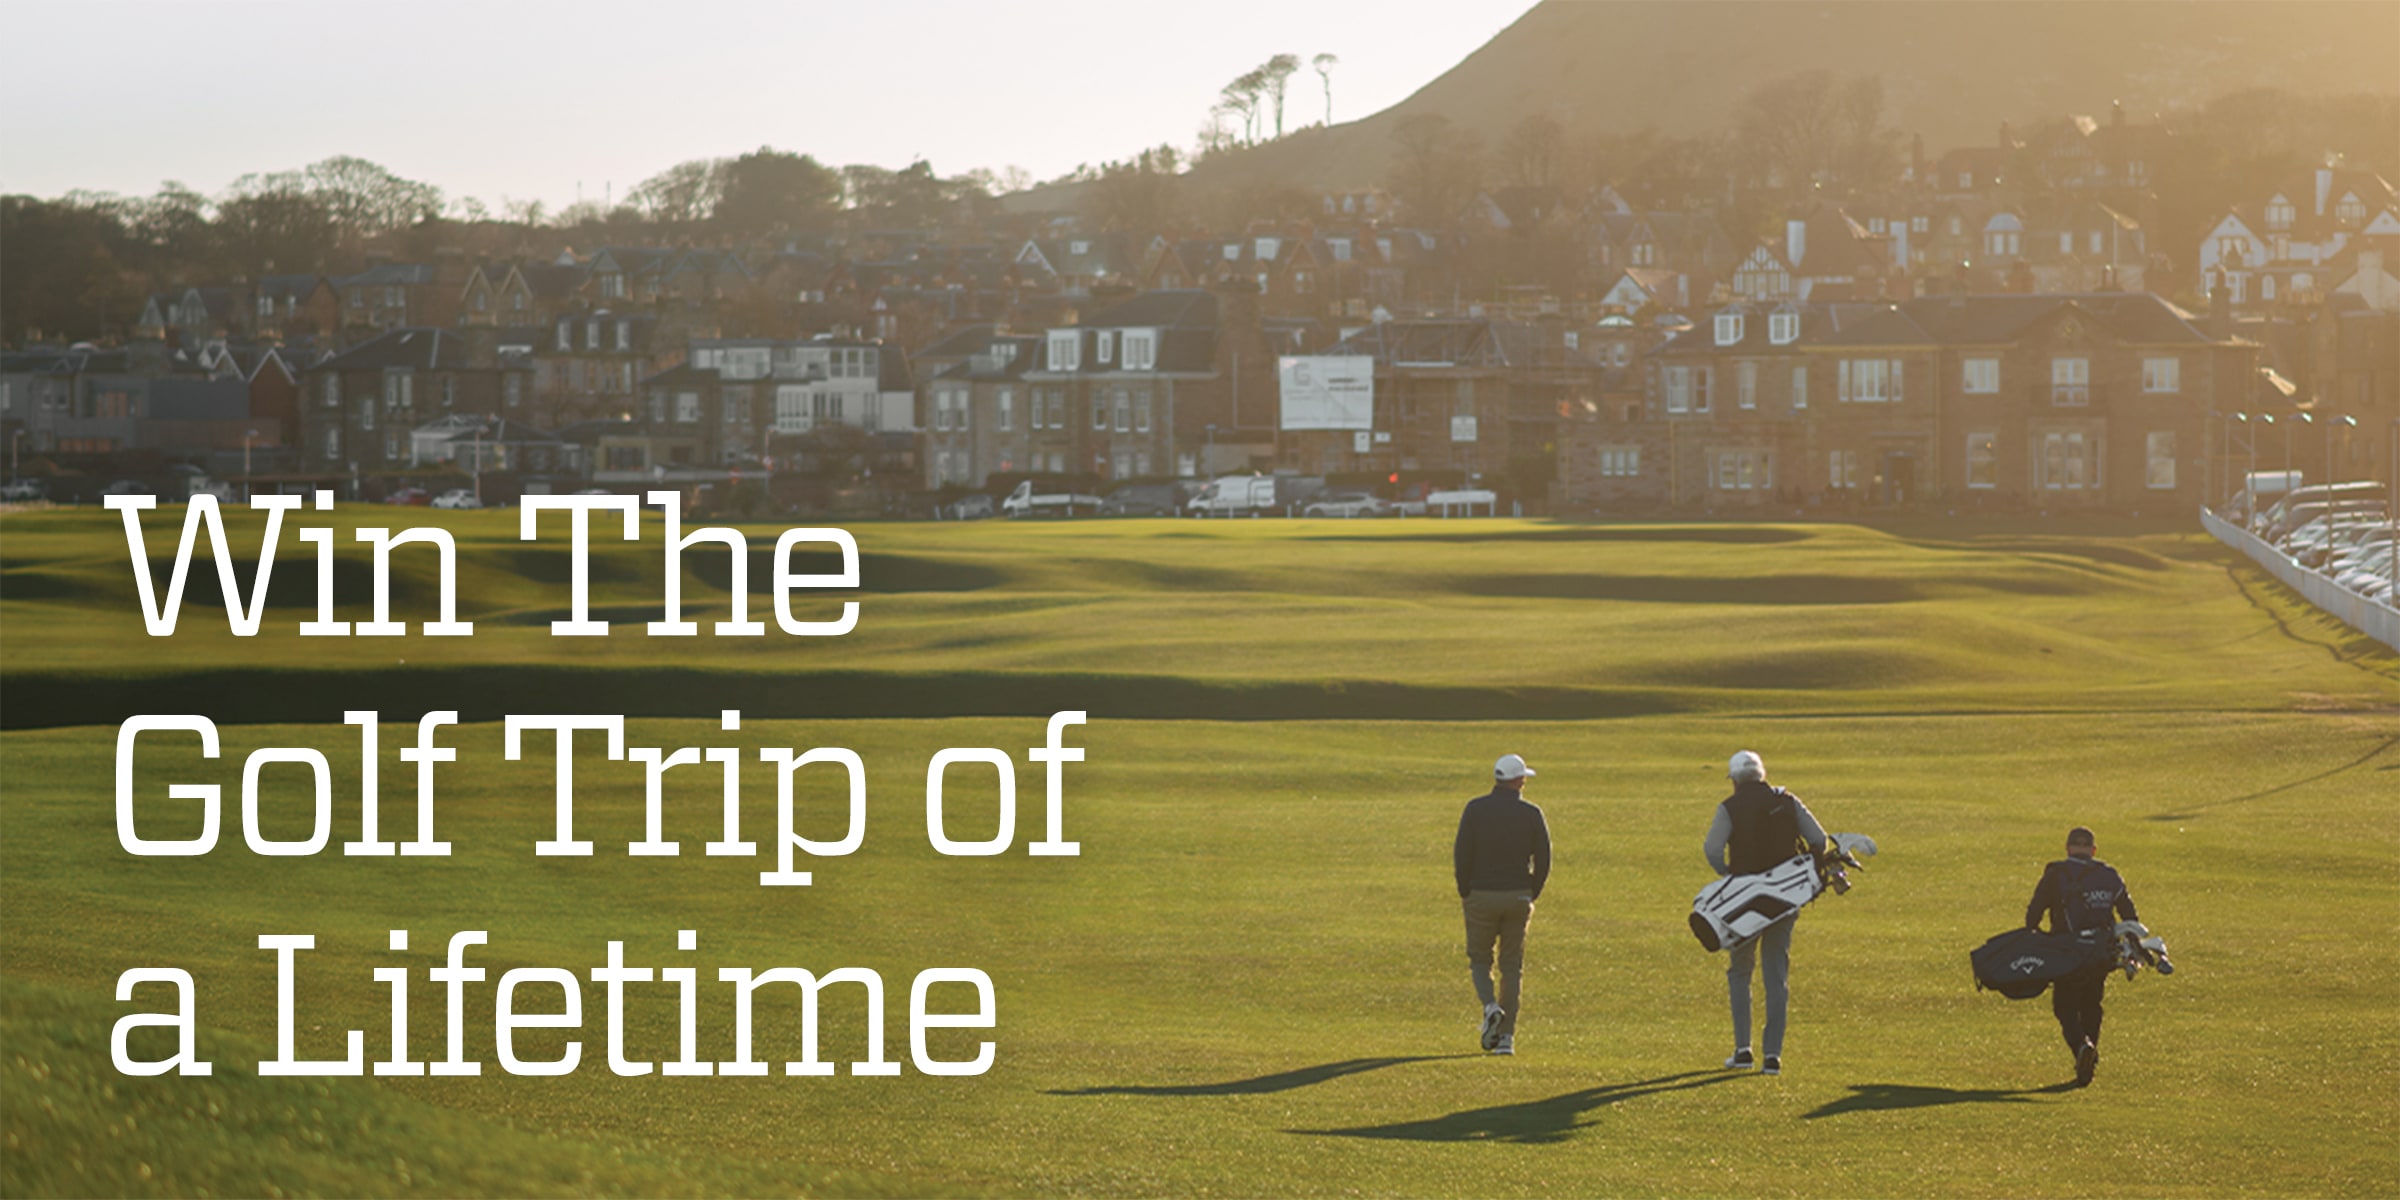  Win the golf trip of a lifetime.